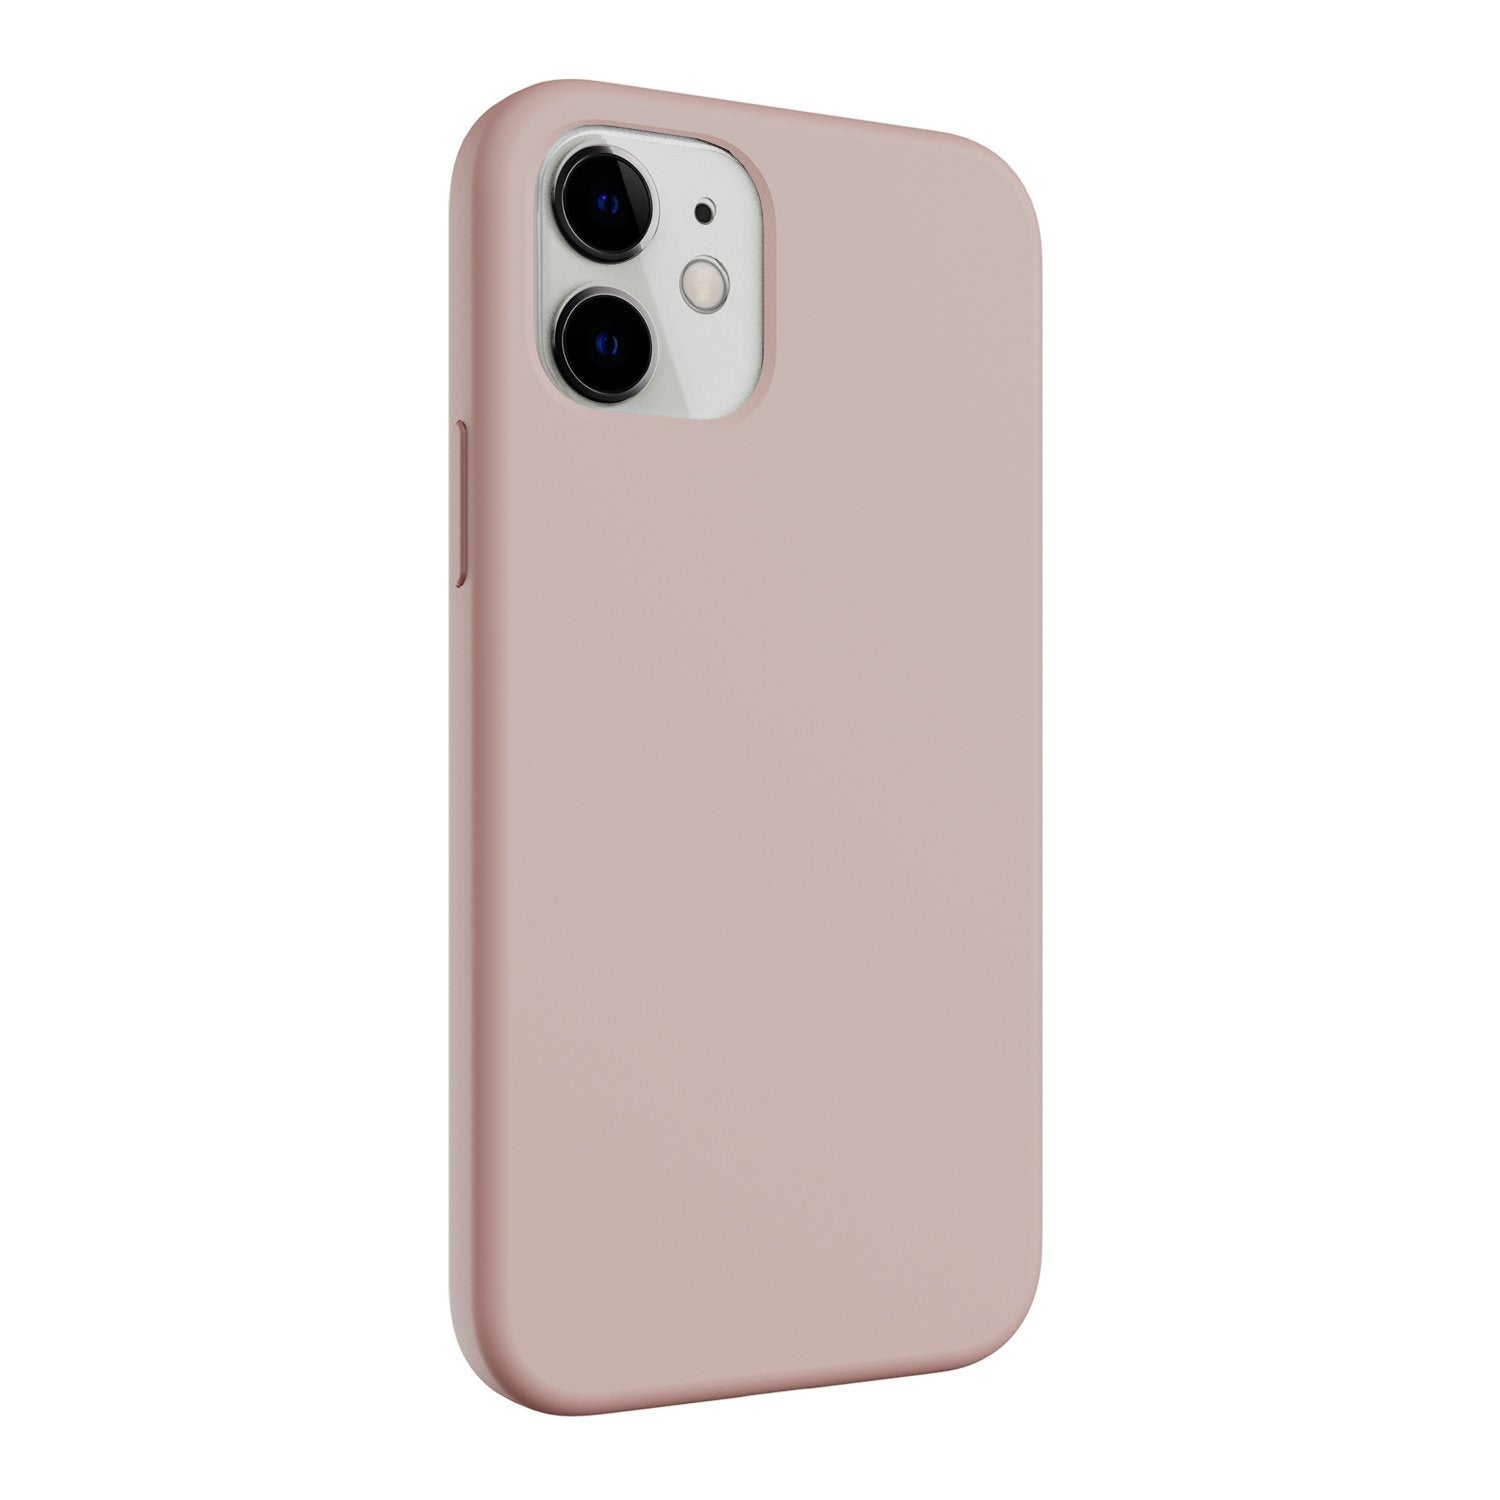 Switcheasy Skin Case for iPhone 12 mini 5.4"(2020), Pink Sand Default Switcheasy 